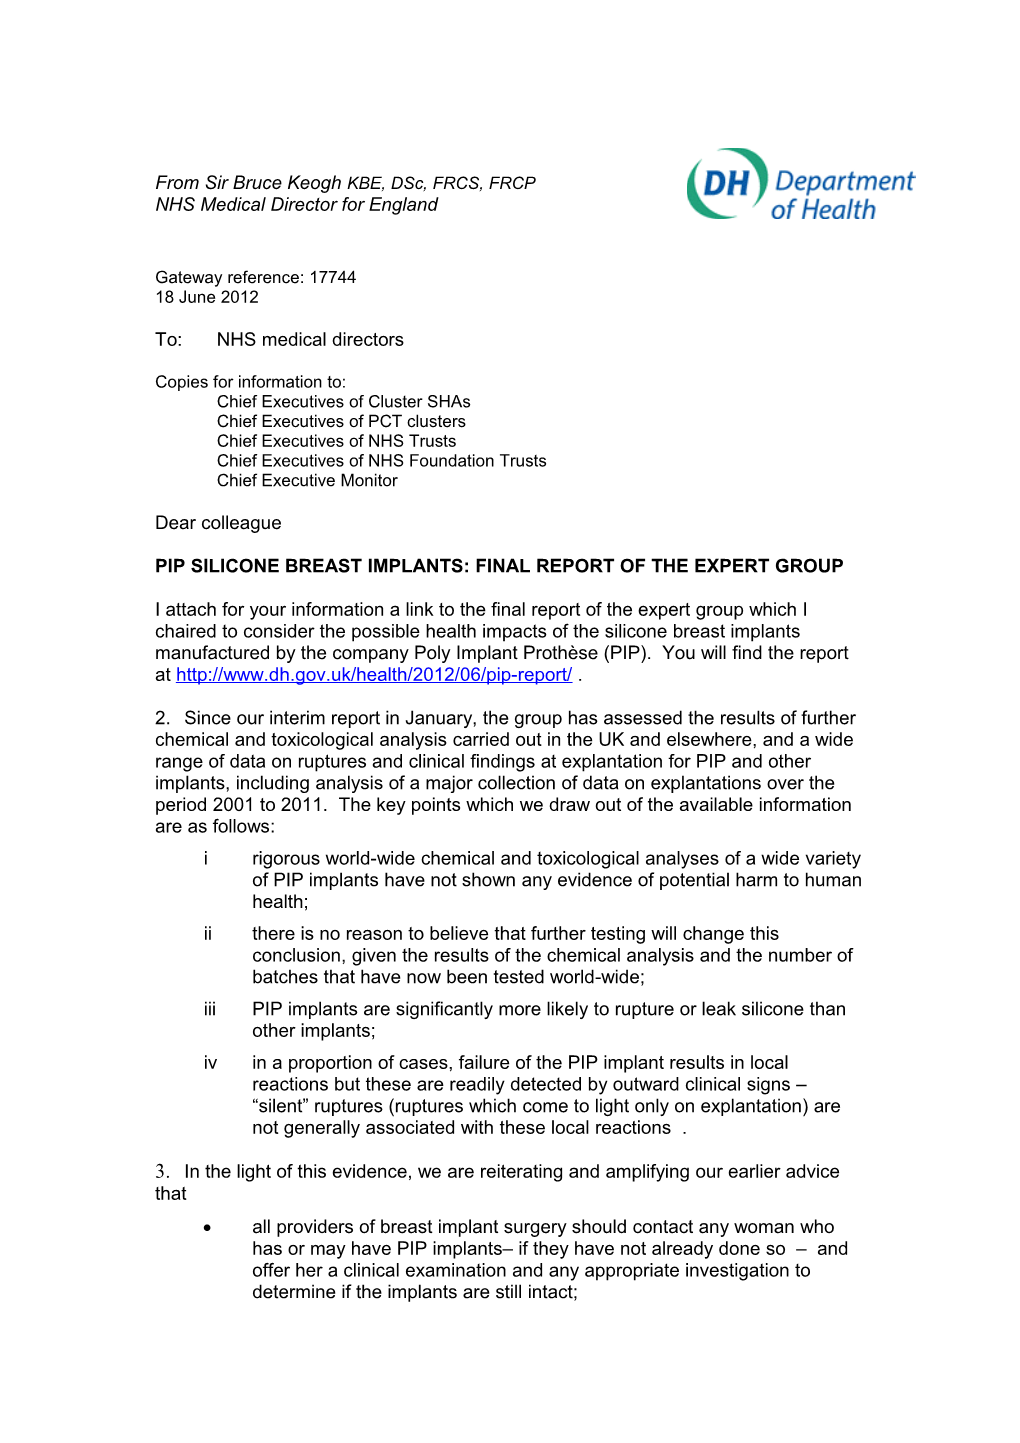 Draft Letter from Bruce Keogh to Nhs Medical Directors